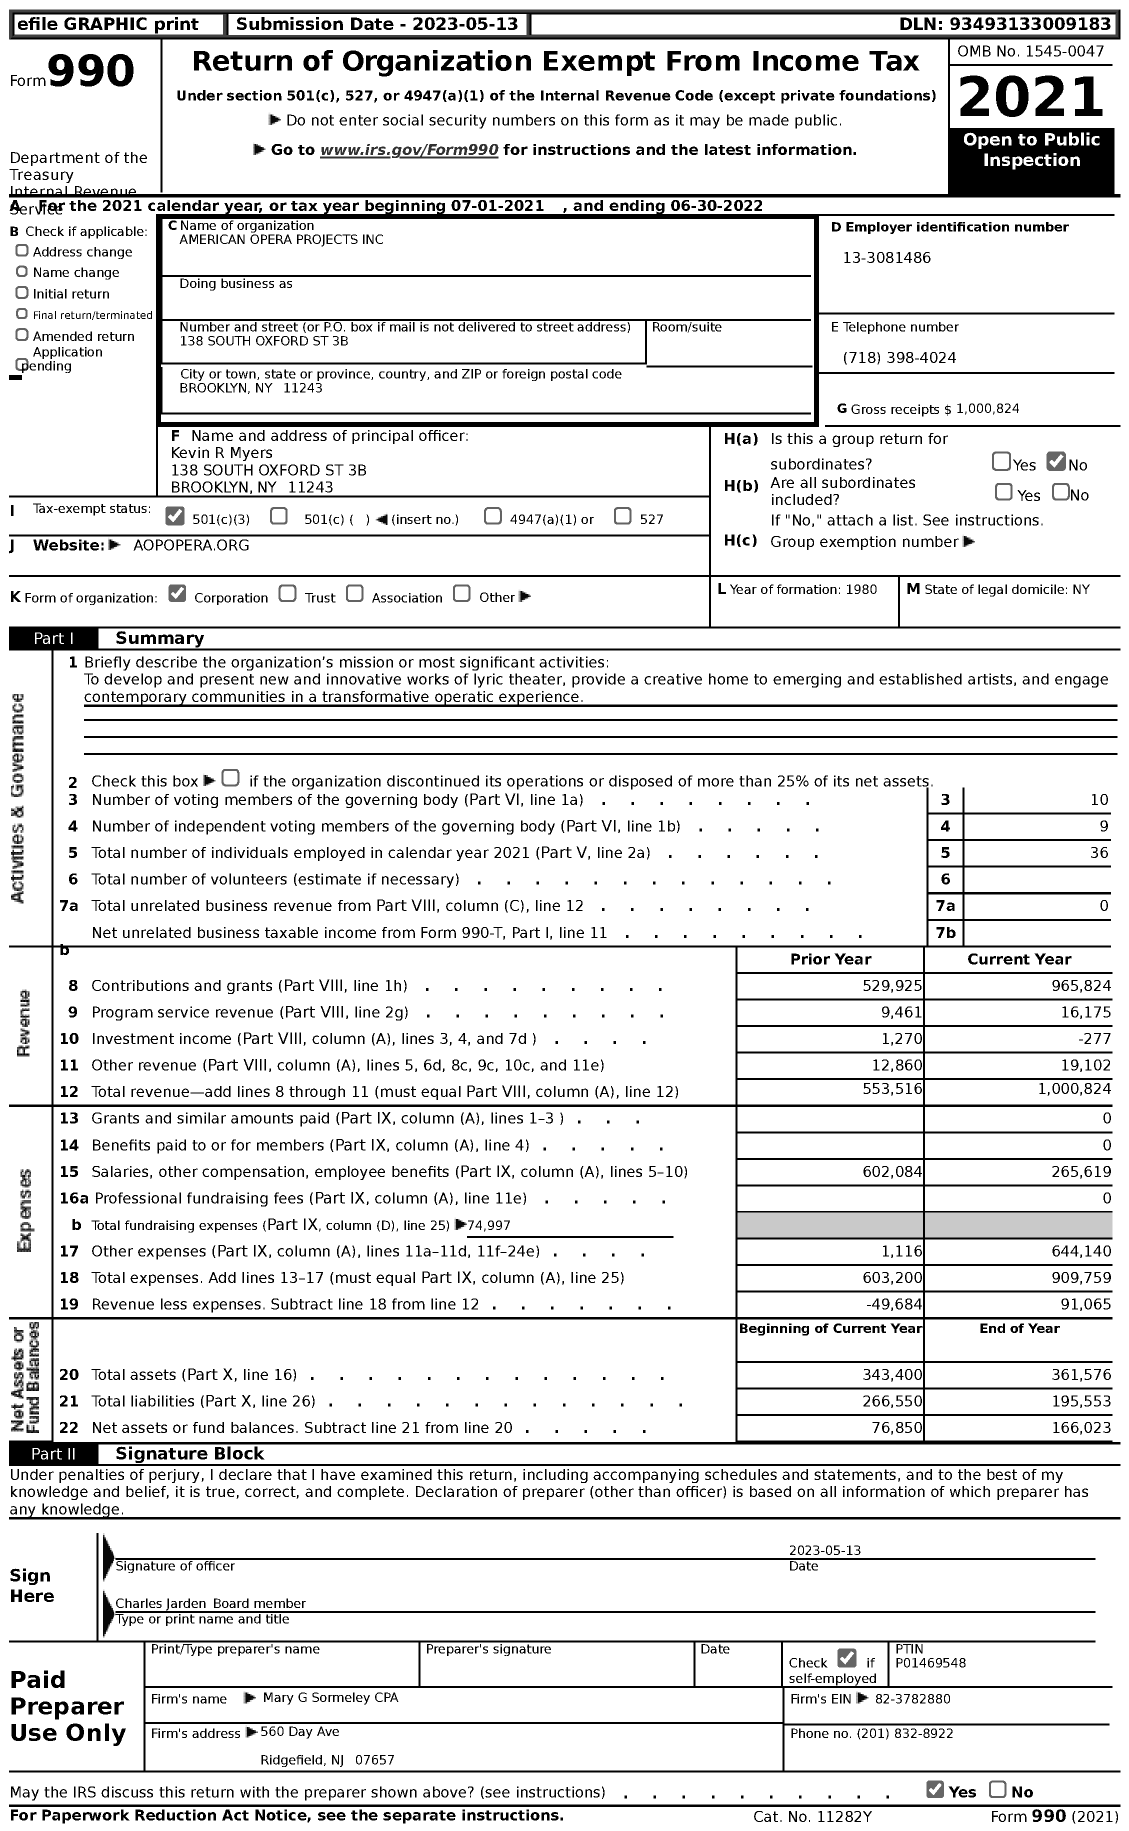 Image of first page of 2021 Form 990 for American Opera Projects